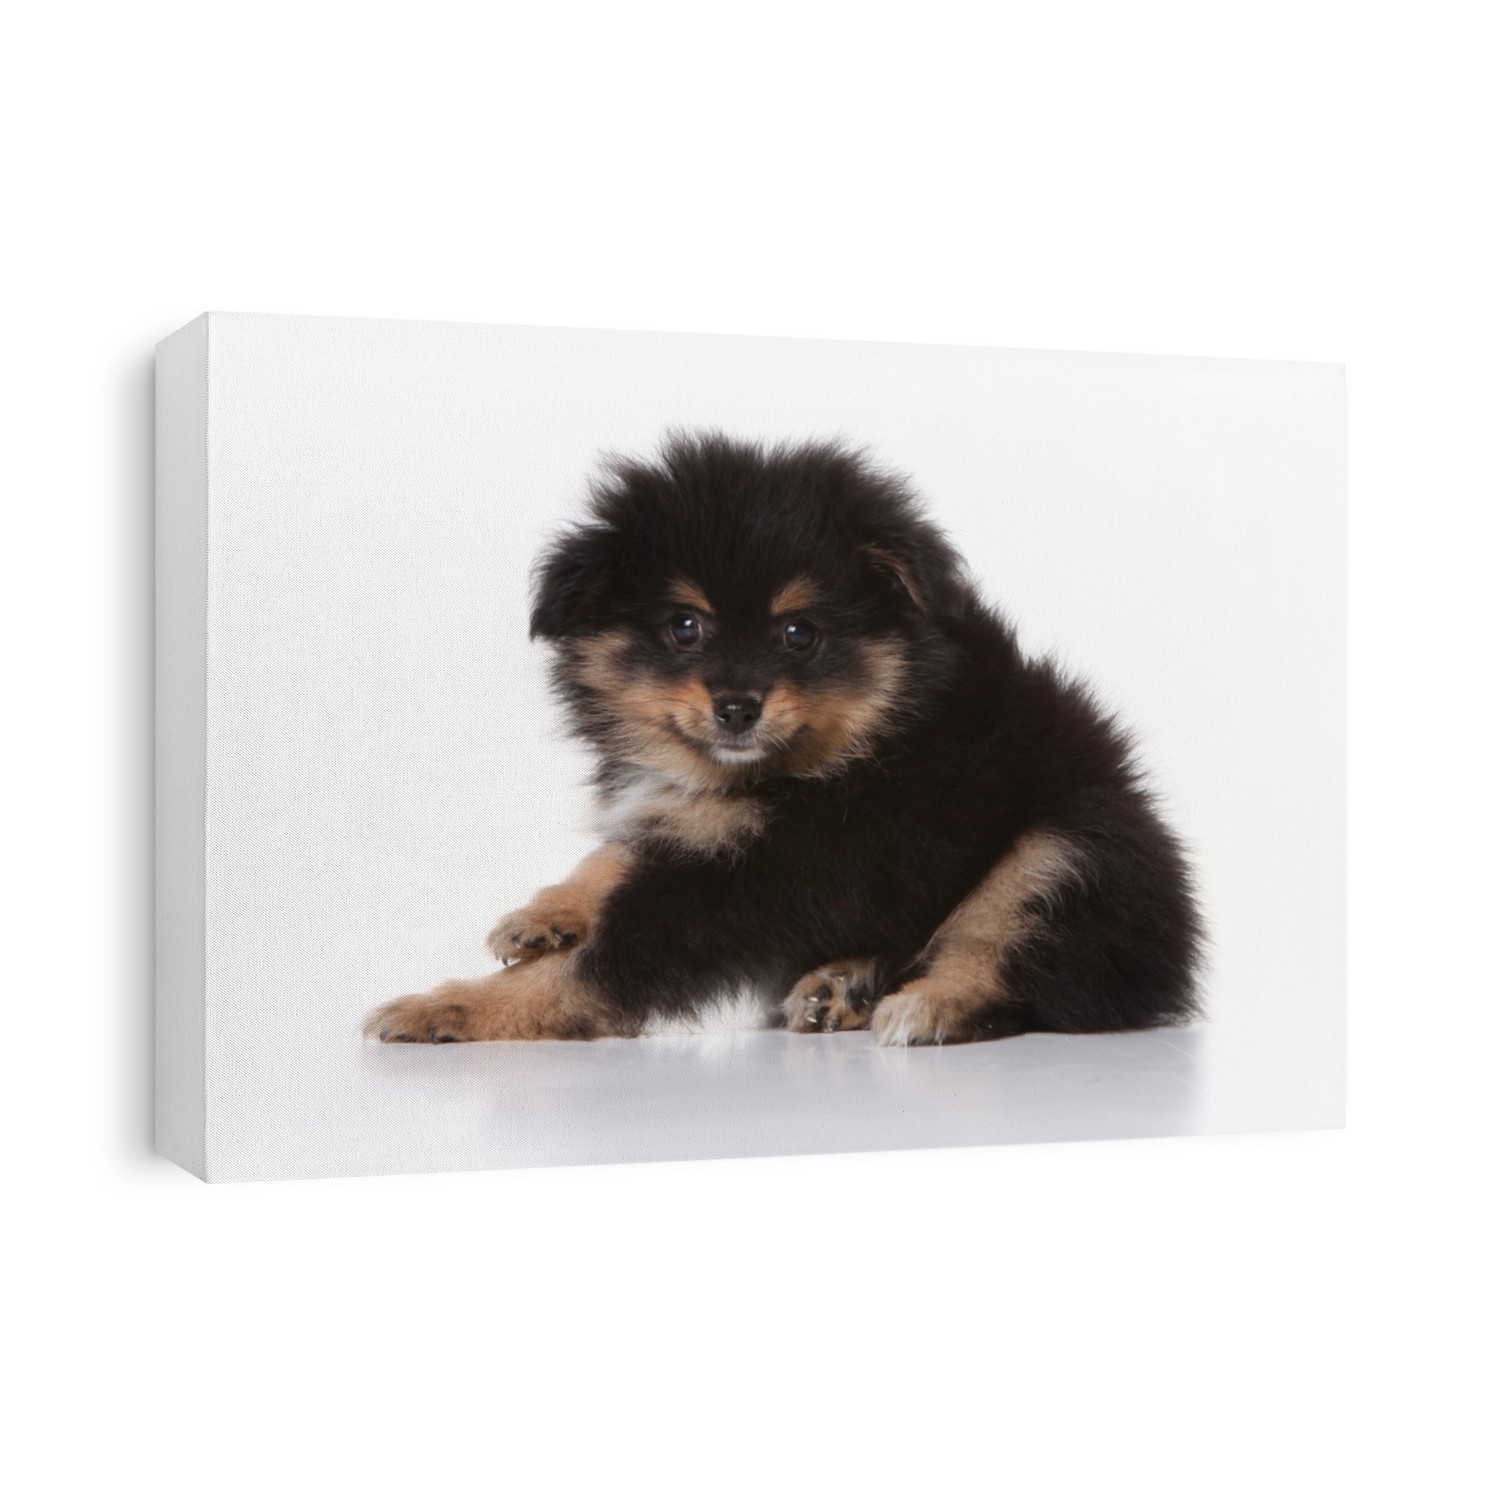 Black Pomeranian Puppy Looking at the Viewer On White Background